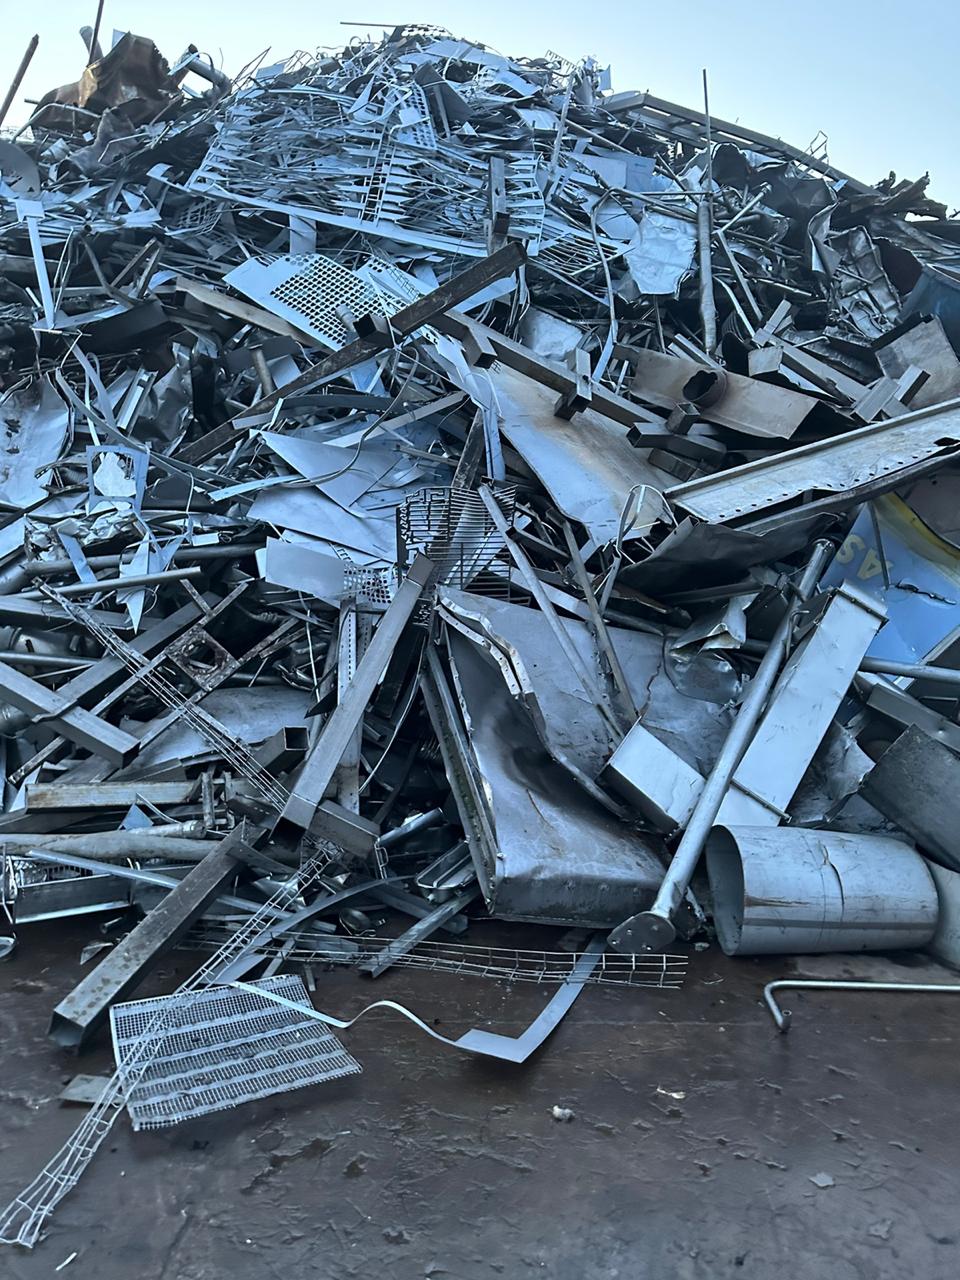 Stainless Steel Scrap Trade In Iceland